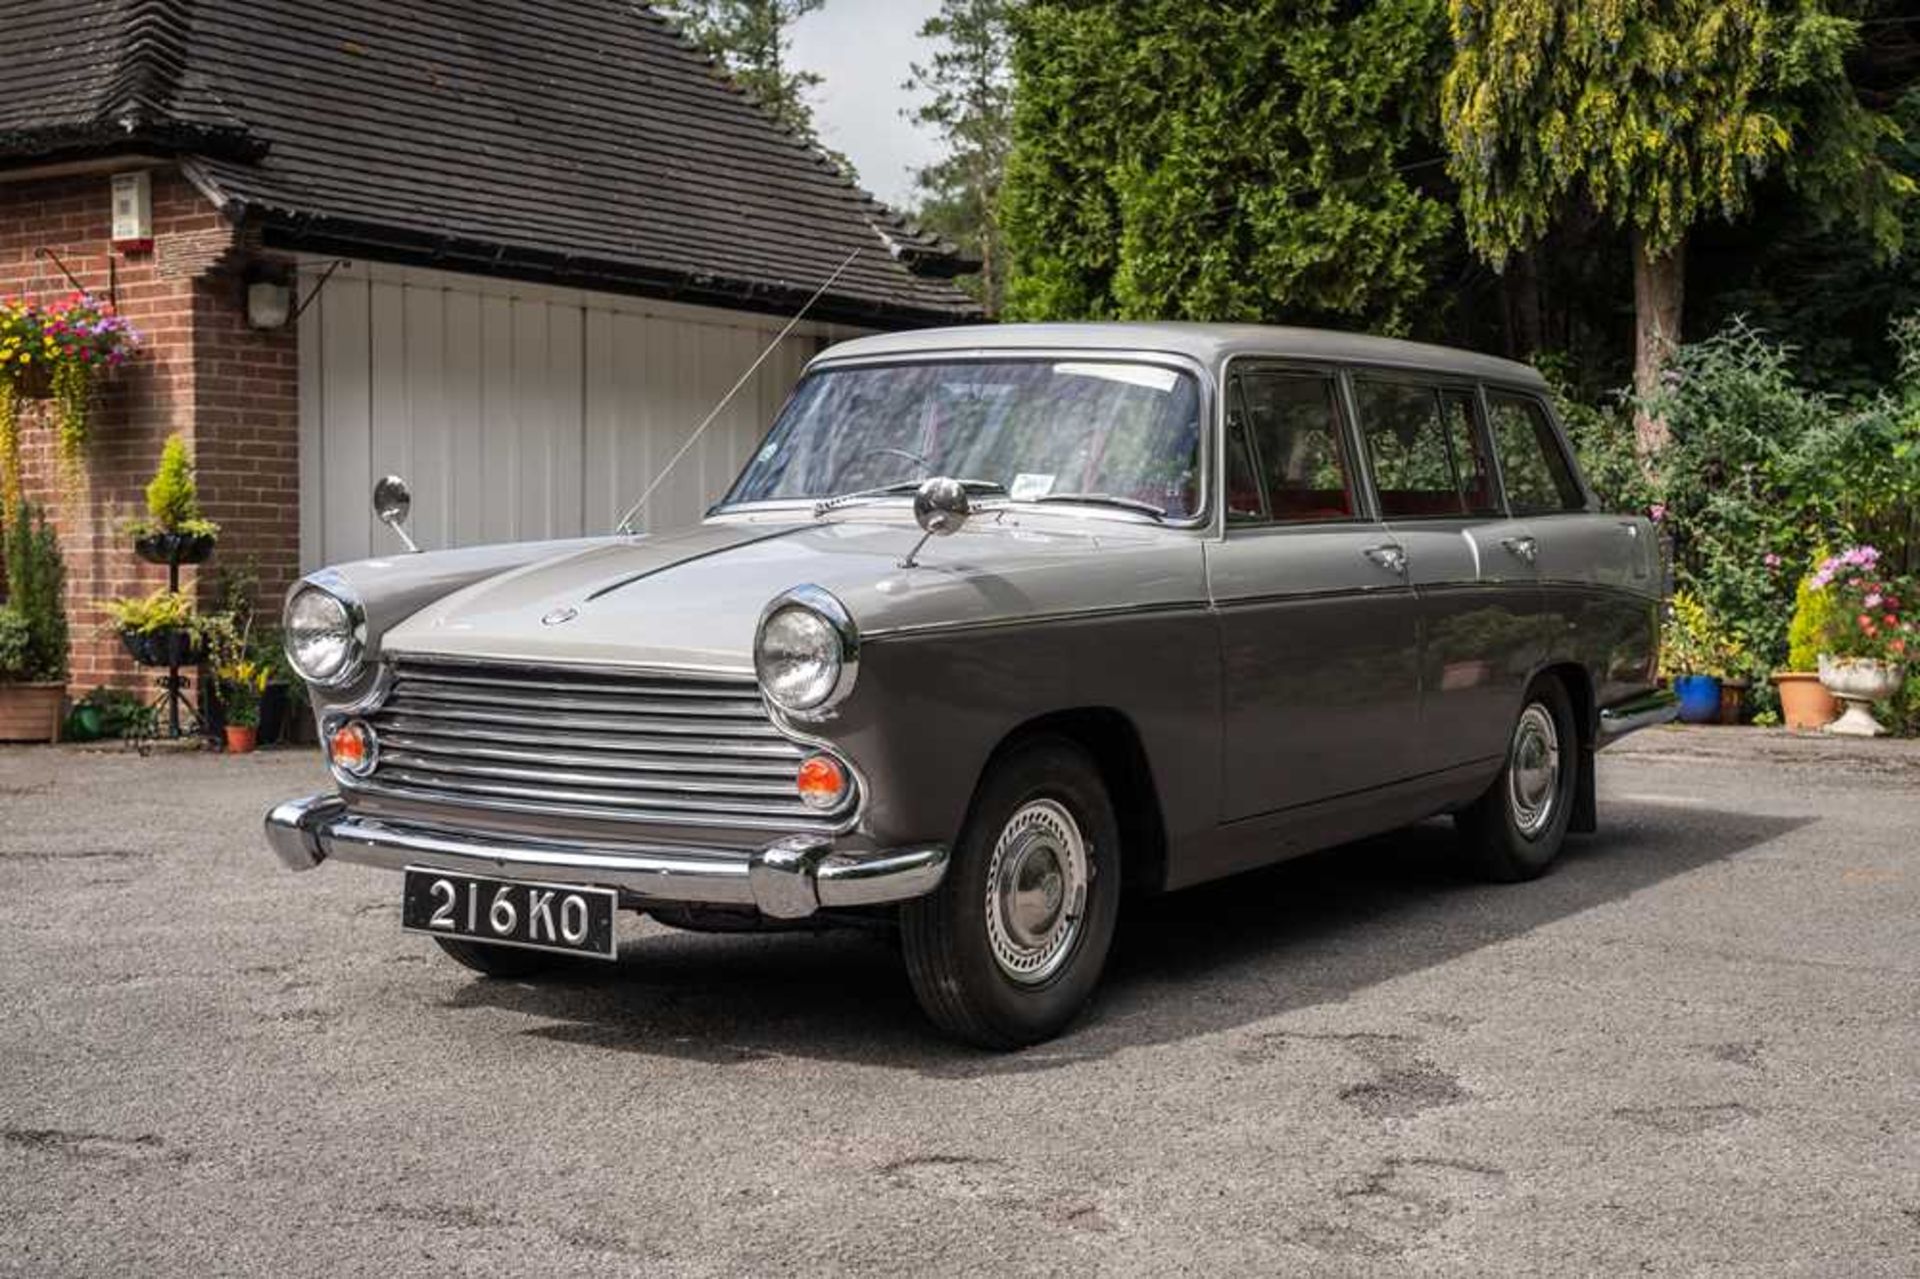 1964 Morris Oxford Series VI Farina Traveller Just 7,000 miles from new - Image 5 of 98